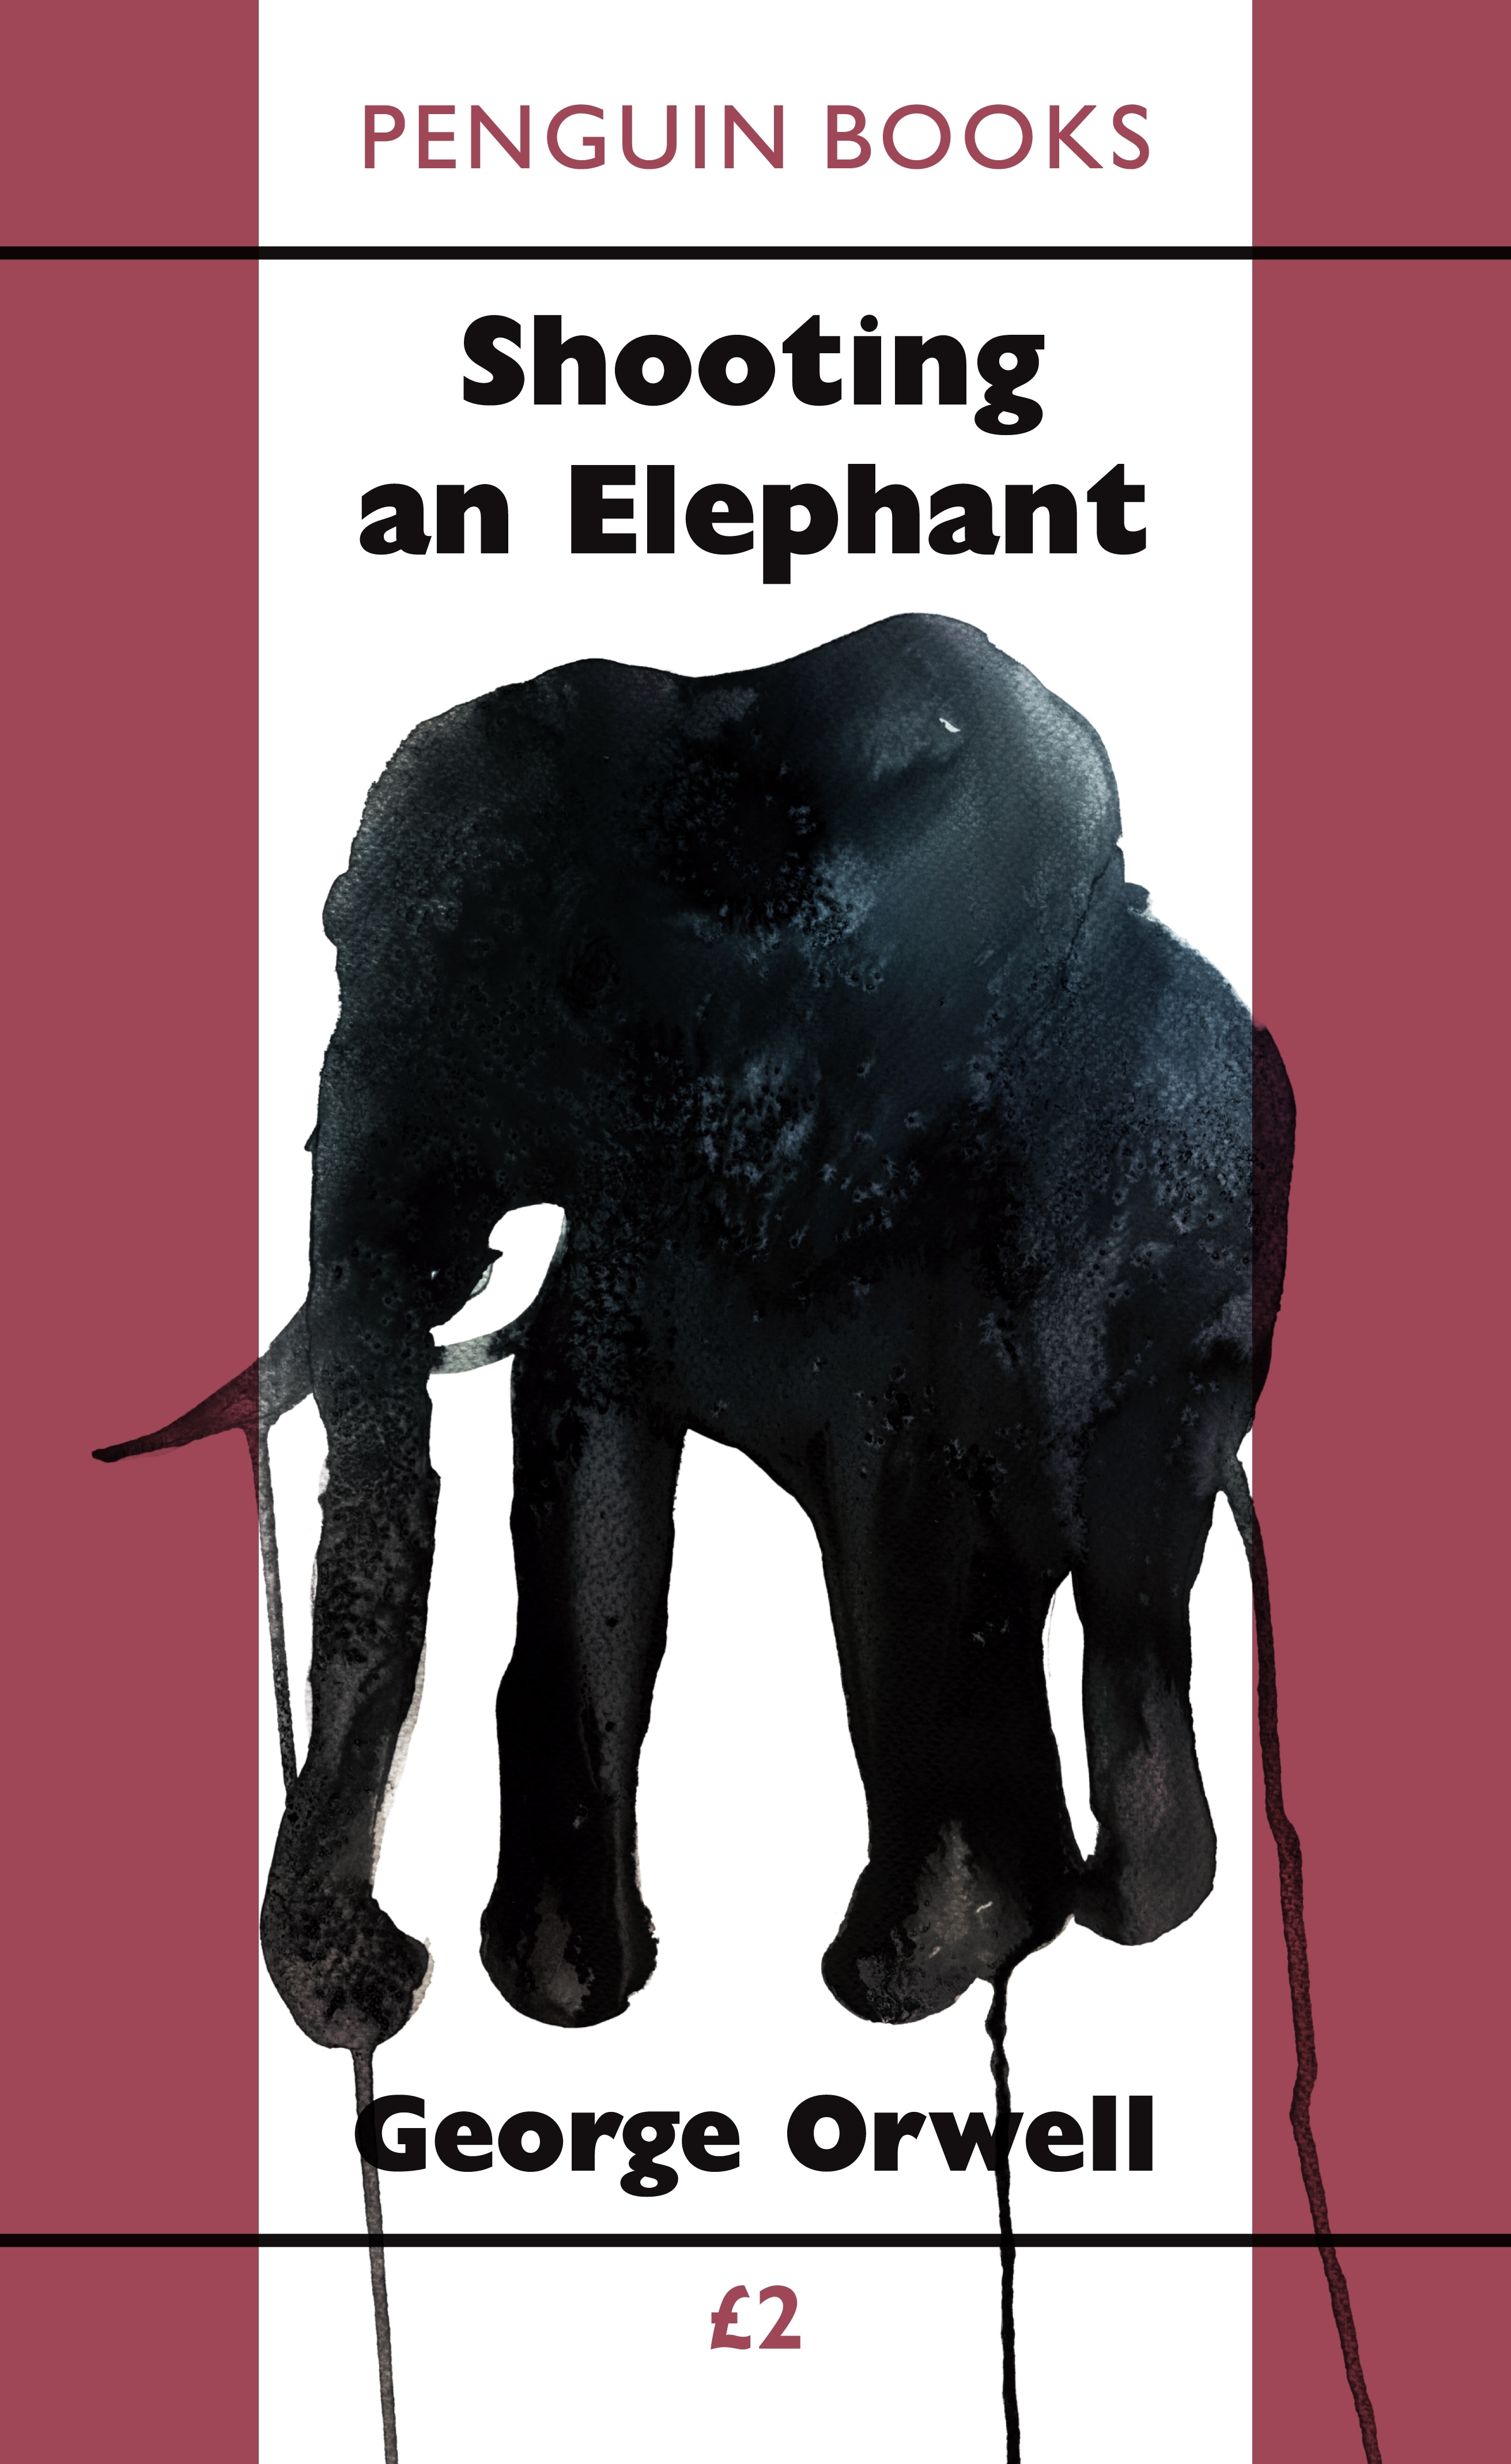 Book “Shooting an Elephant” by George Orwell — January 7, 2021